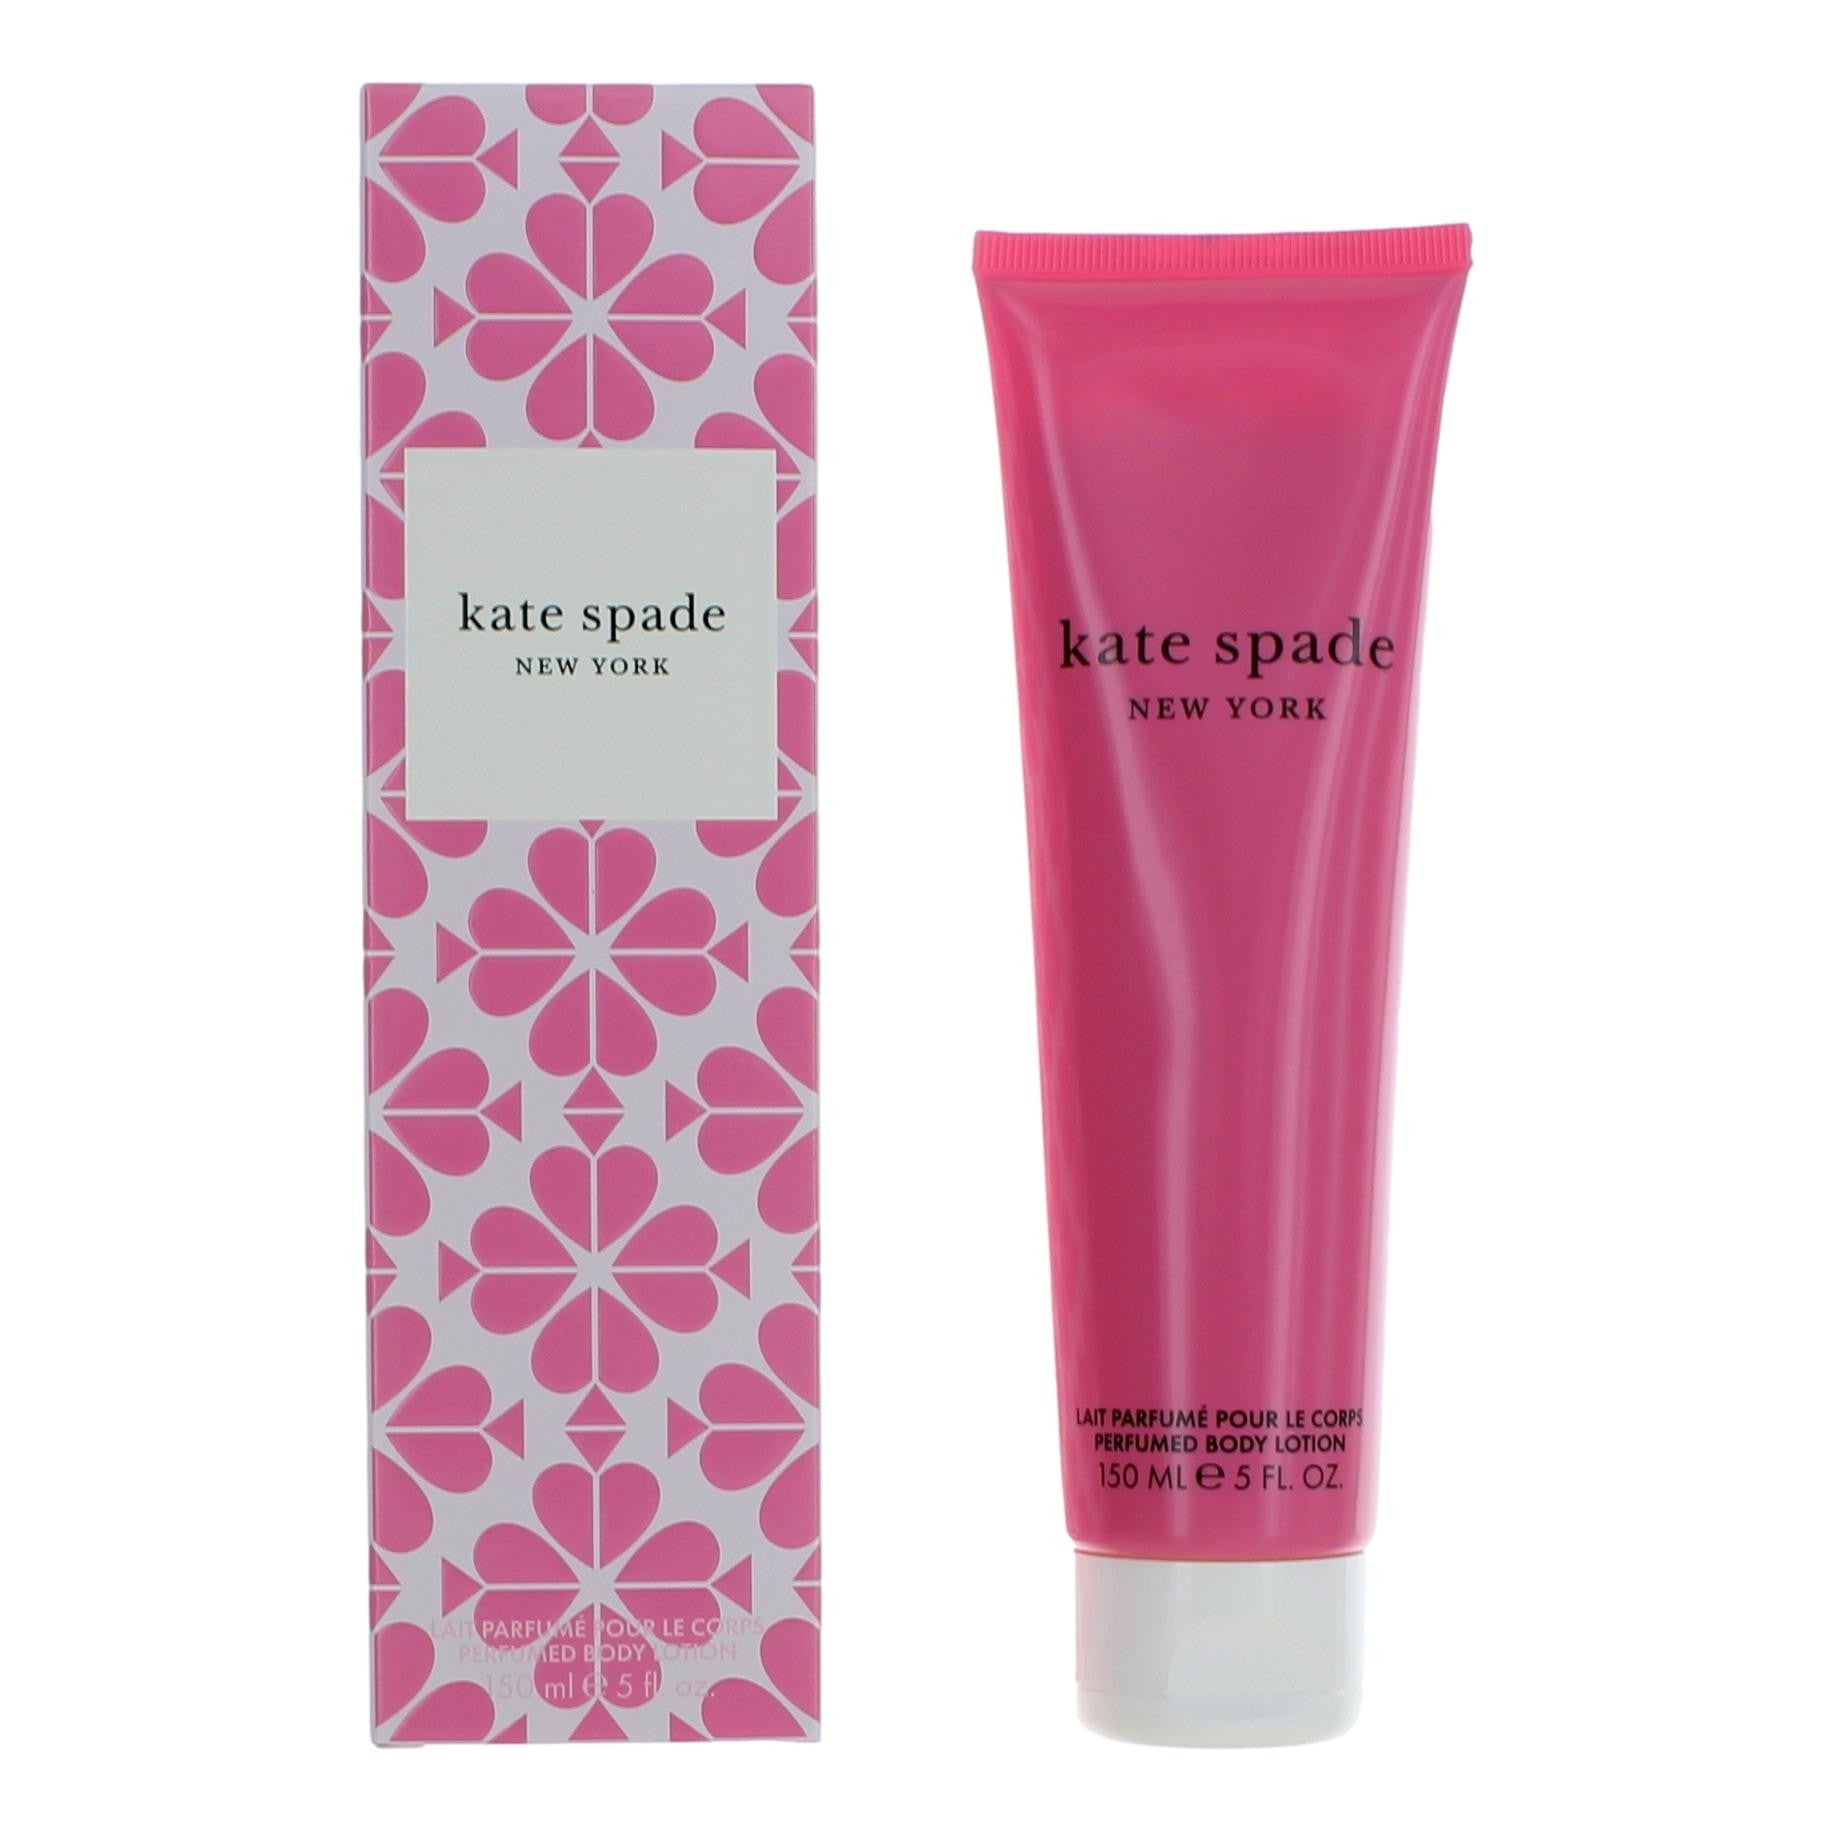 Bottle of Kate Spade by Kate Spade, 5 oz Body Lotion for Women